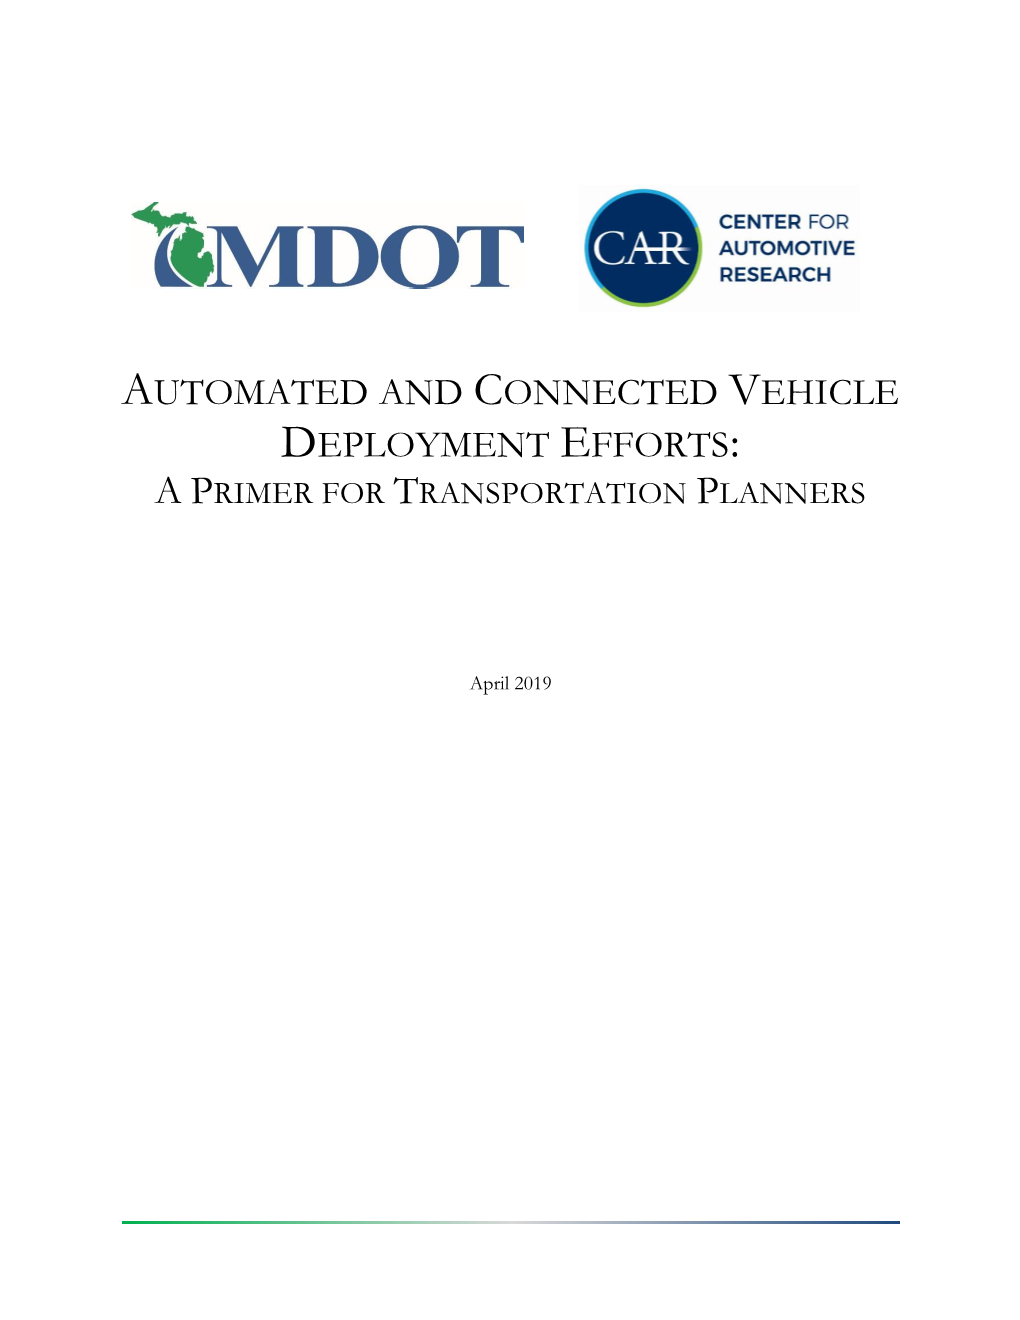 Automated and Connected Vehicle Deployment Efforts: a Primer for Transportation Planners